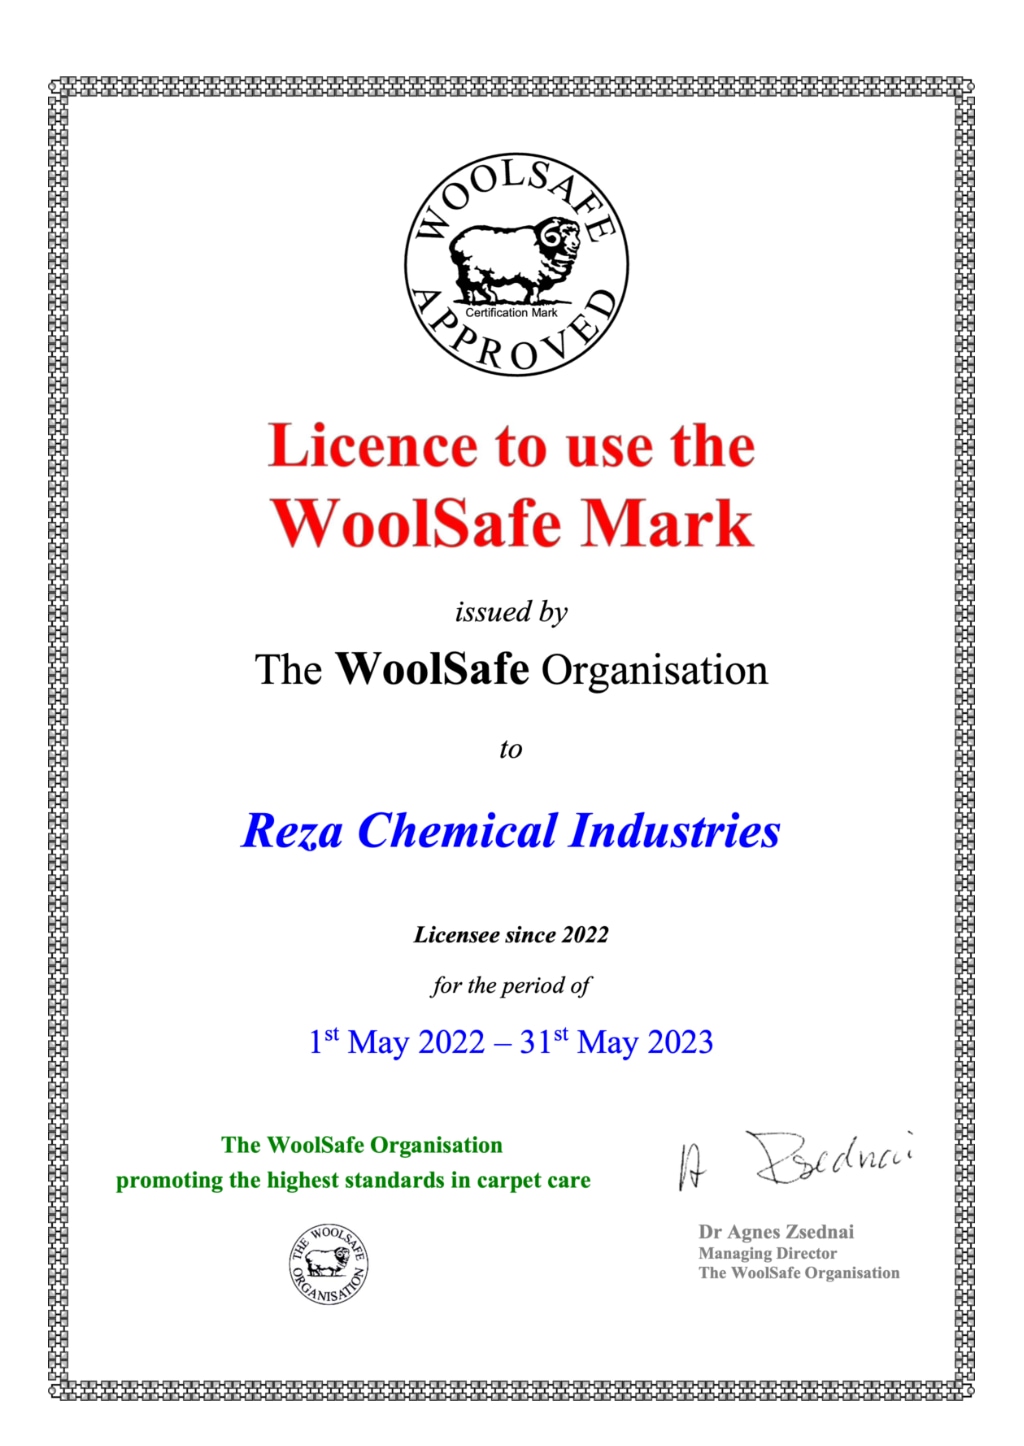 WoolSafe Licence 2022